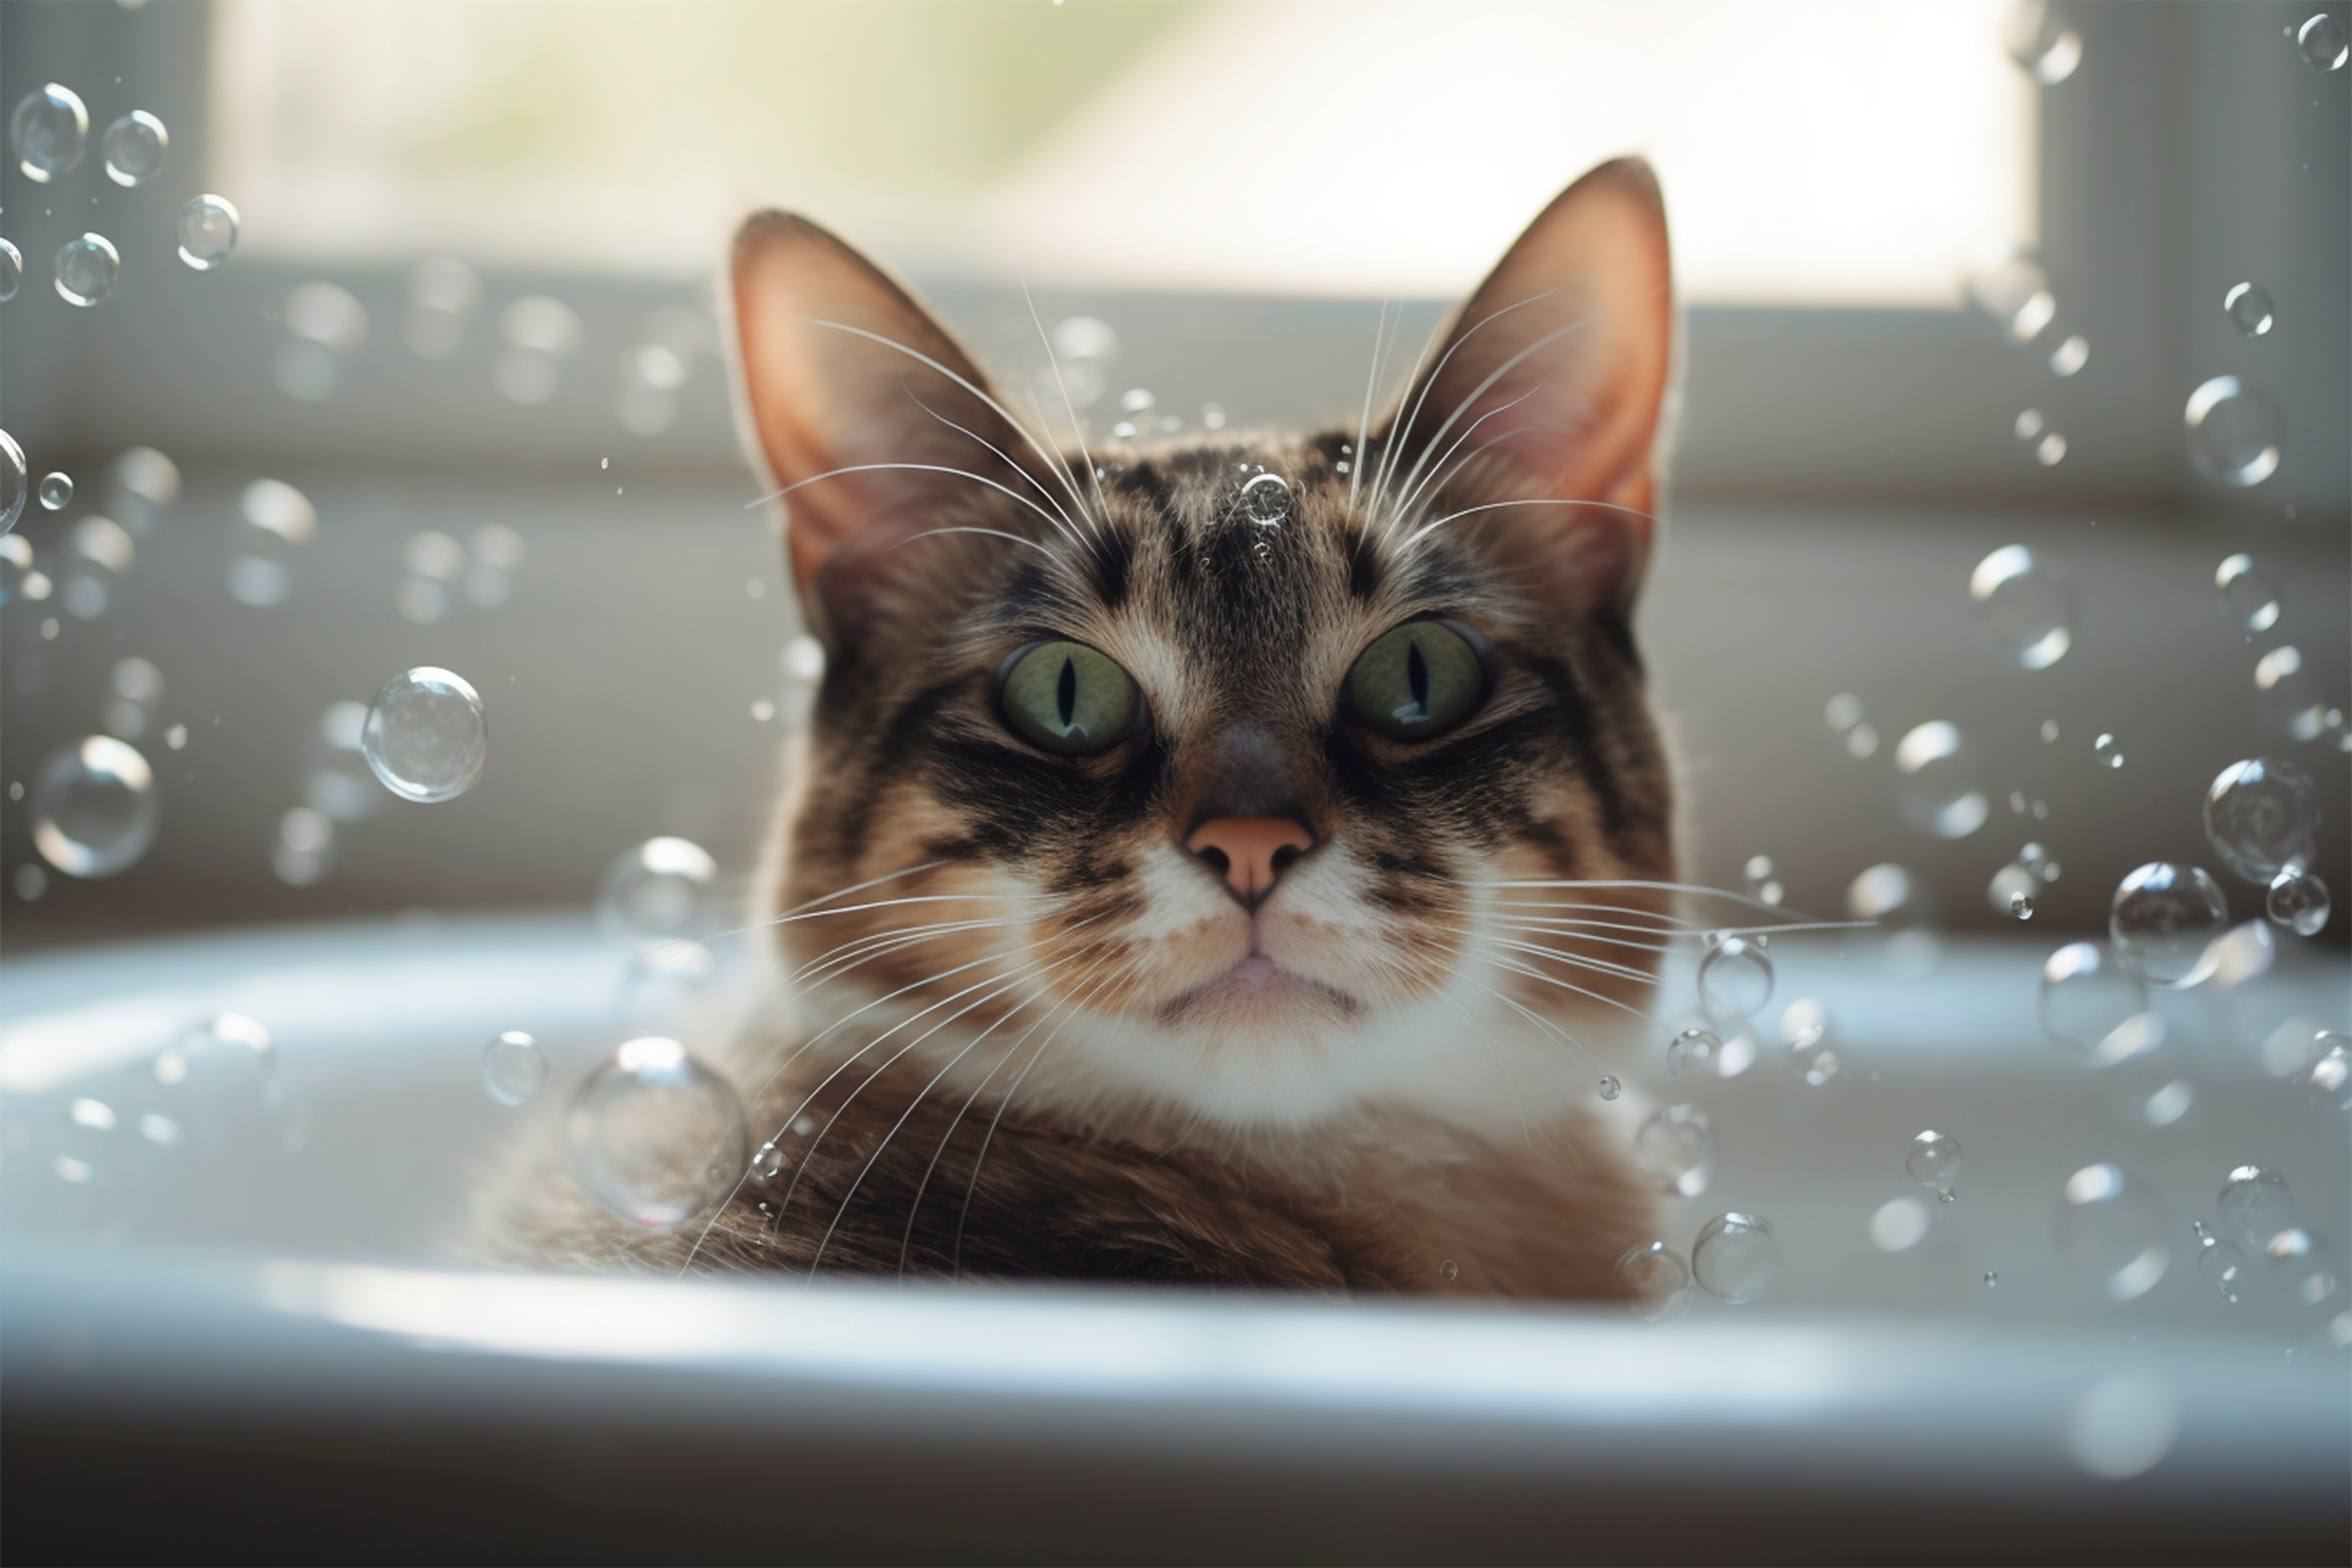 Grooming Essentials: Maintaining Your Cat's Coat and Hygiene